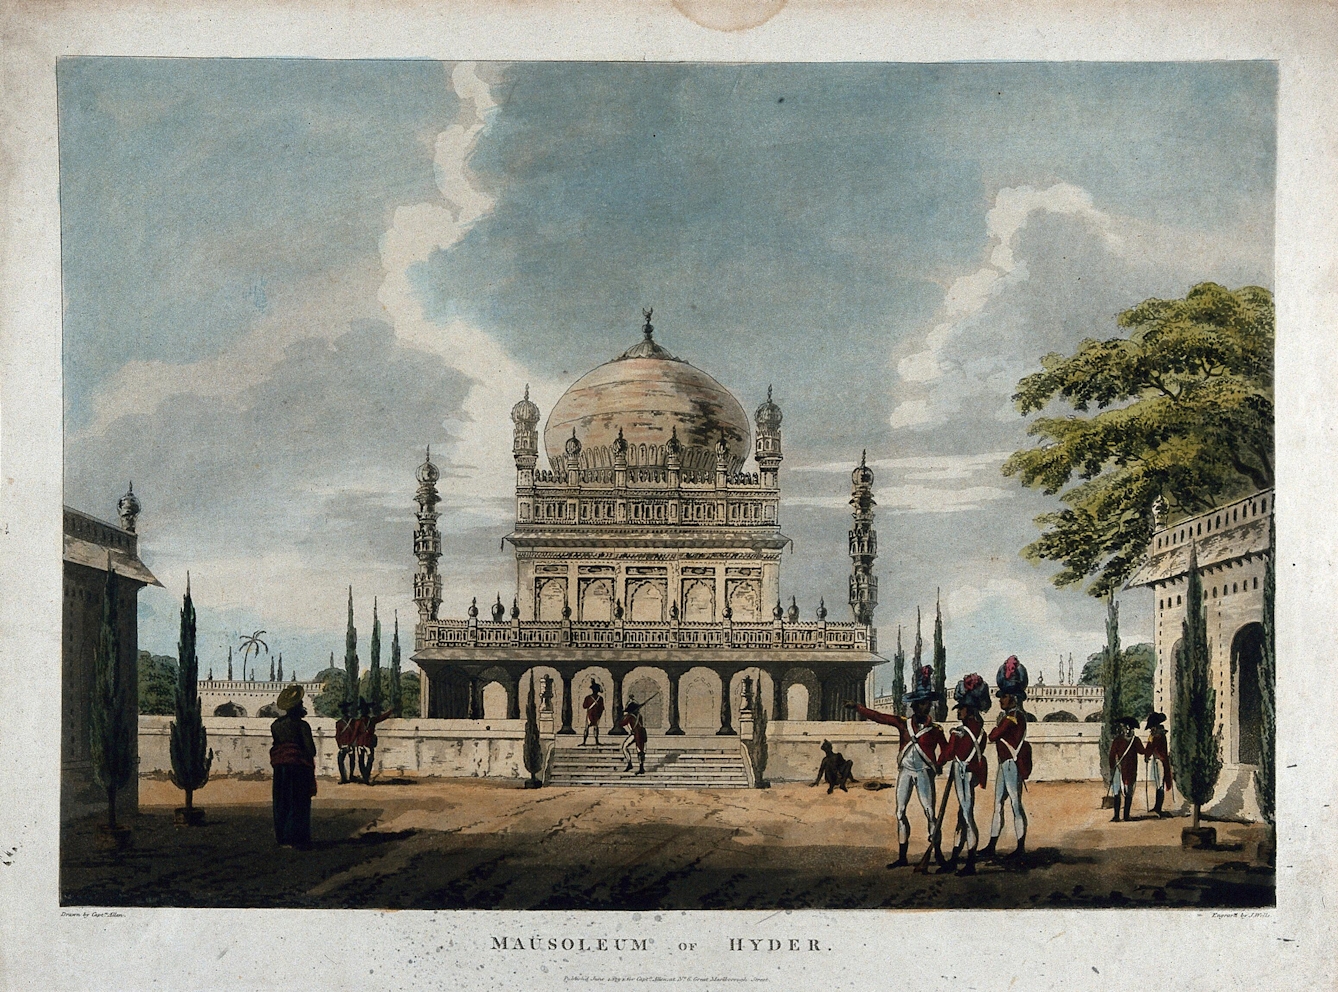 Colourful print, etching and aquatint with watercolour, of the Mausoleum of Haidar Ali. The print shows an elaborate mausoleum building with a large domed top and many decorative pillars and features. There is a courtyard outside the mausoleum where several groups of soldiers are standing patrol, with guns across their shoulders. There are several trees across the landscape and the sky is blue with clouds. Text along the bottom of the print reads ' Mausoleum of Hyder', smaller text below this reads 'Drawn by Capt Allen. Published June 4 1974 for Capt Allen at No 6 Great Malborough Street.'